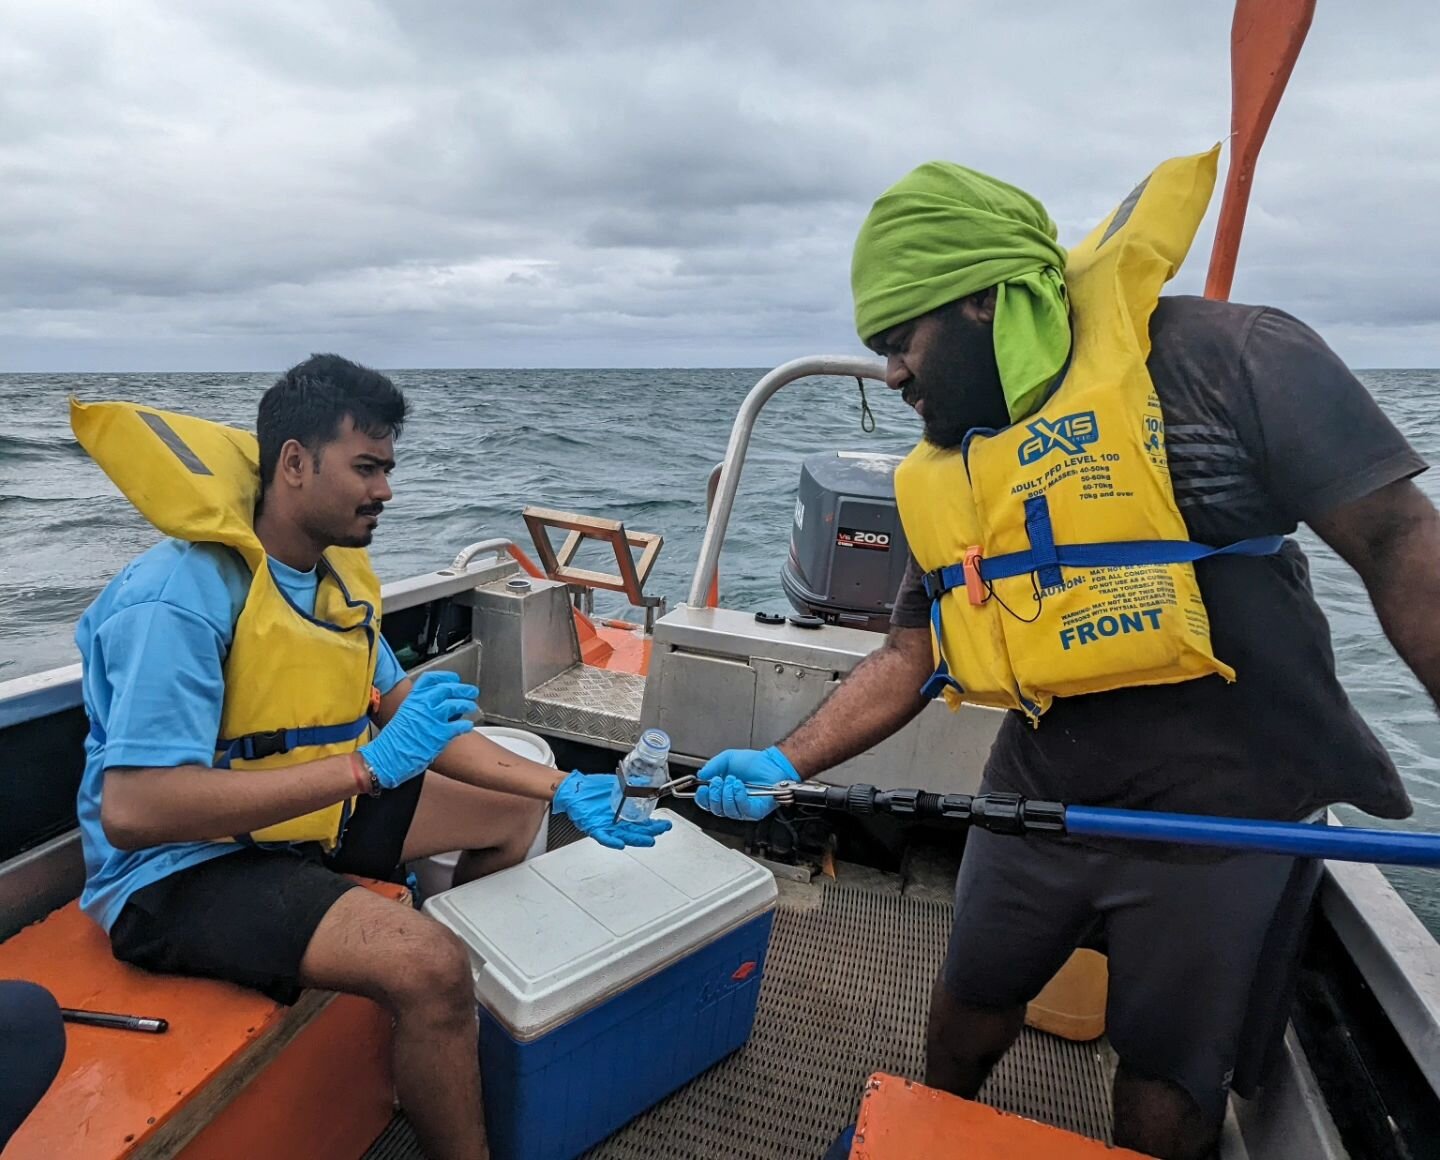 This week we were out on the water with @unisouthpacific students Devavrat Bishwa and Karalo Drekenavere collecting data for their research project - Assessing the Feeding Habitat of Oceanic Manta Rays in Laucala Bay, Fiji. 

Despite the choppy water